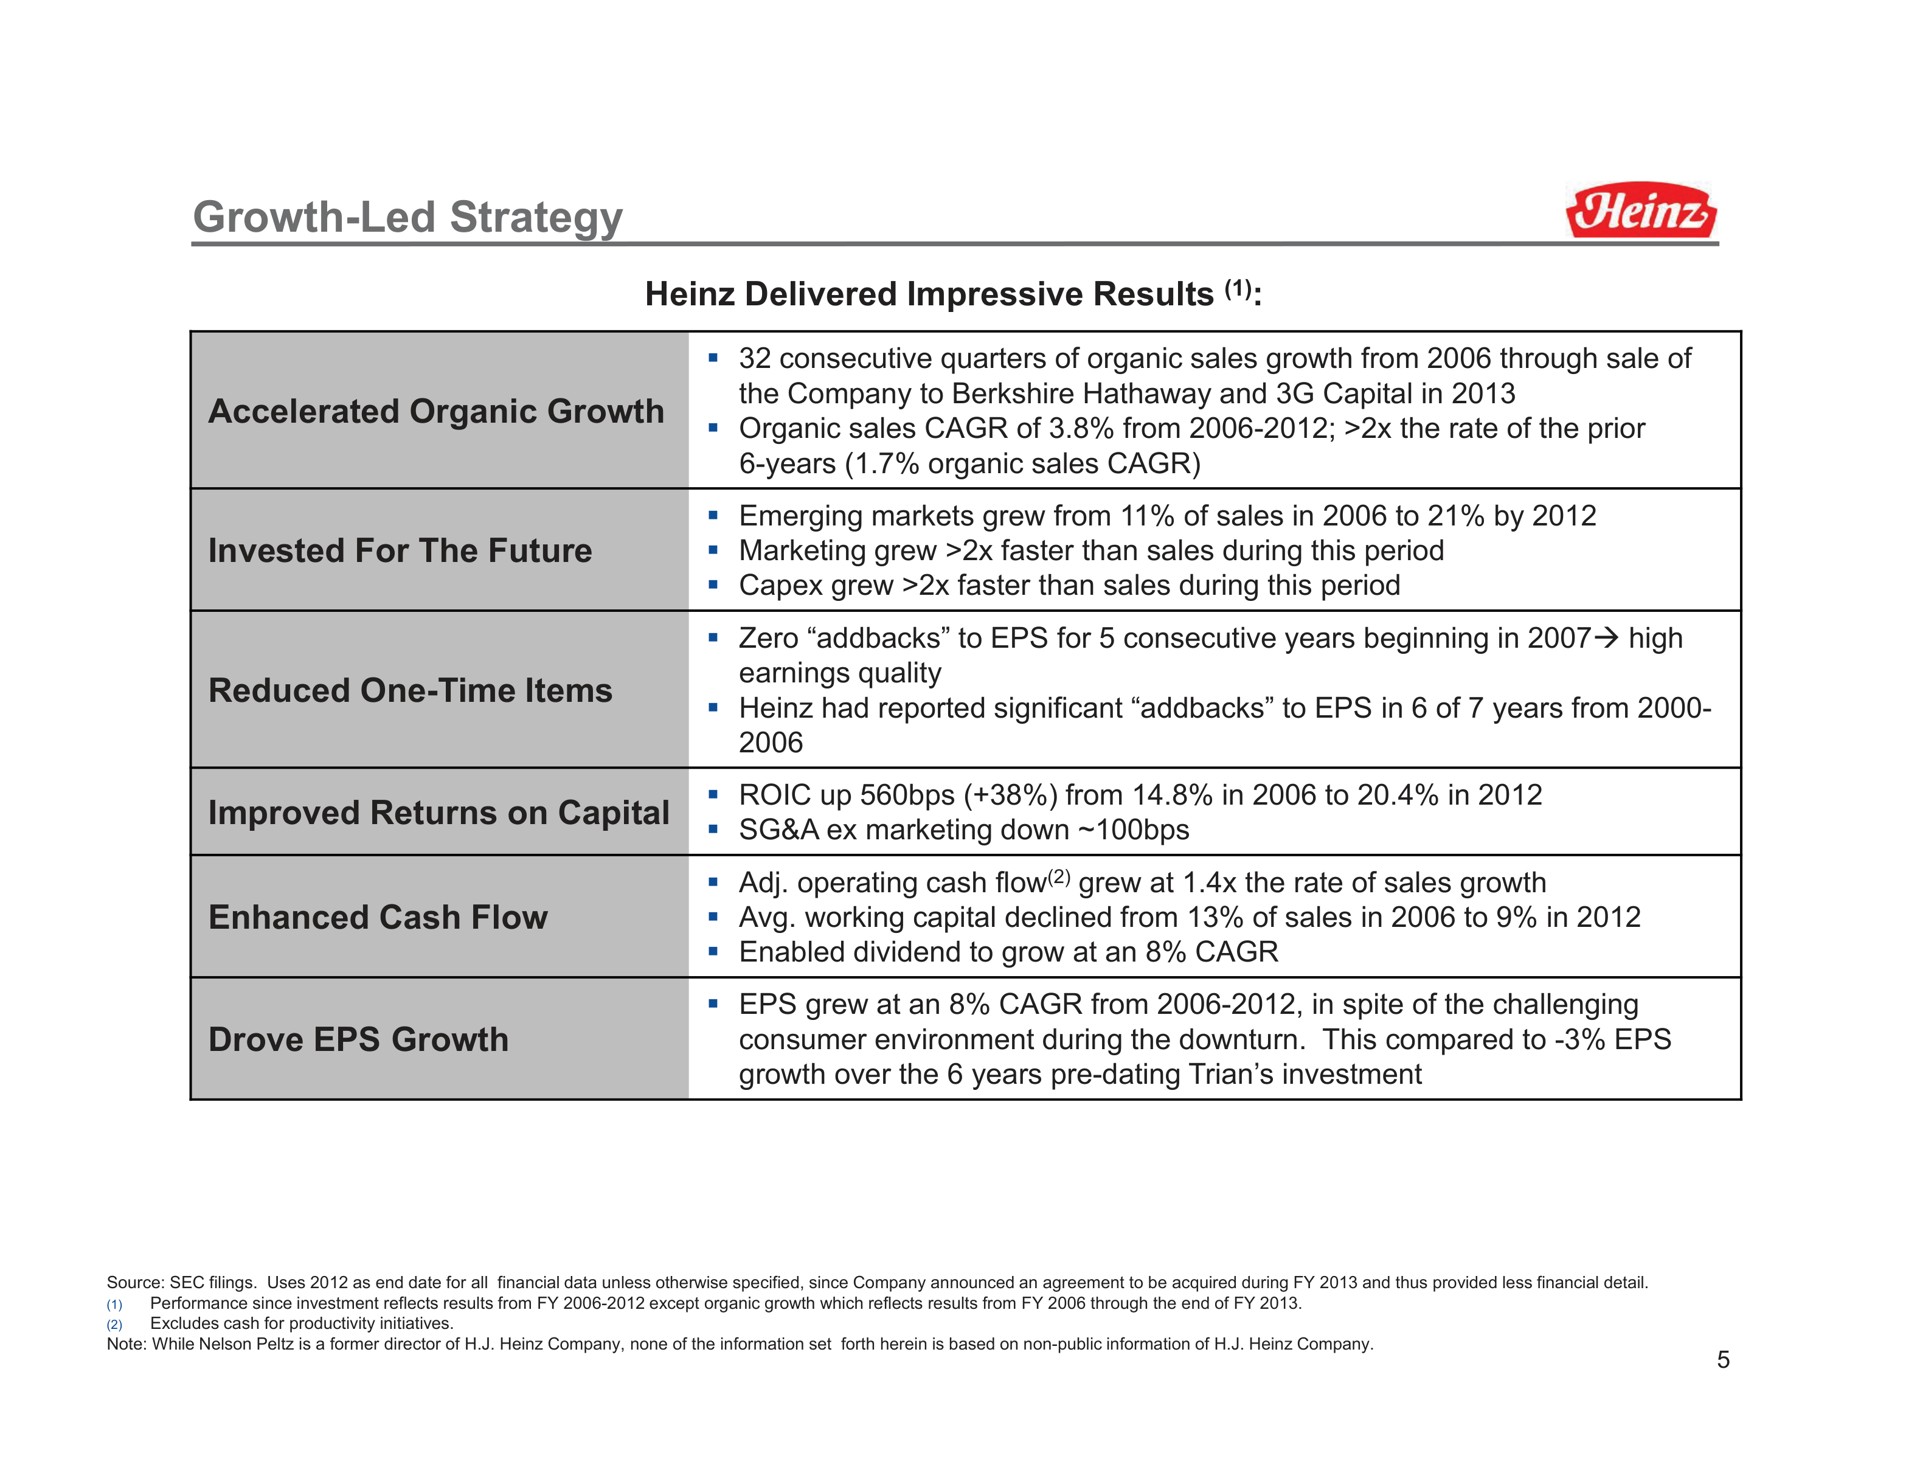 growth led strategy delivered impressive results accelerated organic growth invested for the future reduced one time items improved returns on capital enhanced cash flow drove growth marketing grew faster than sales during this period working declined from of sales in to in consumer environment during downturn this compared to | Trian Partners